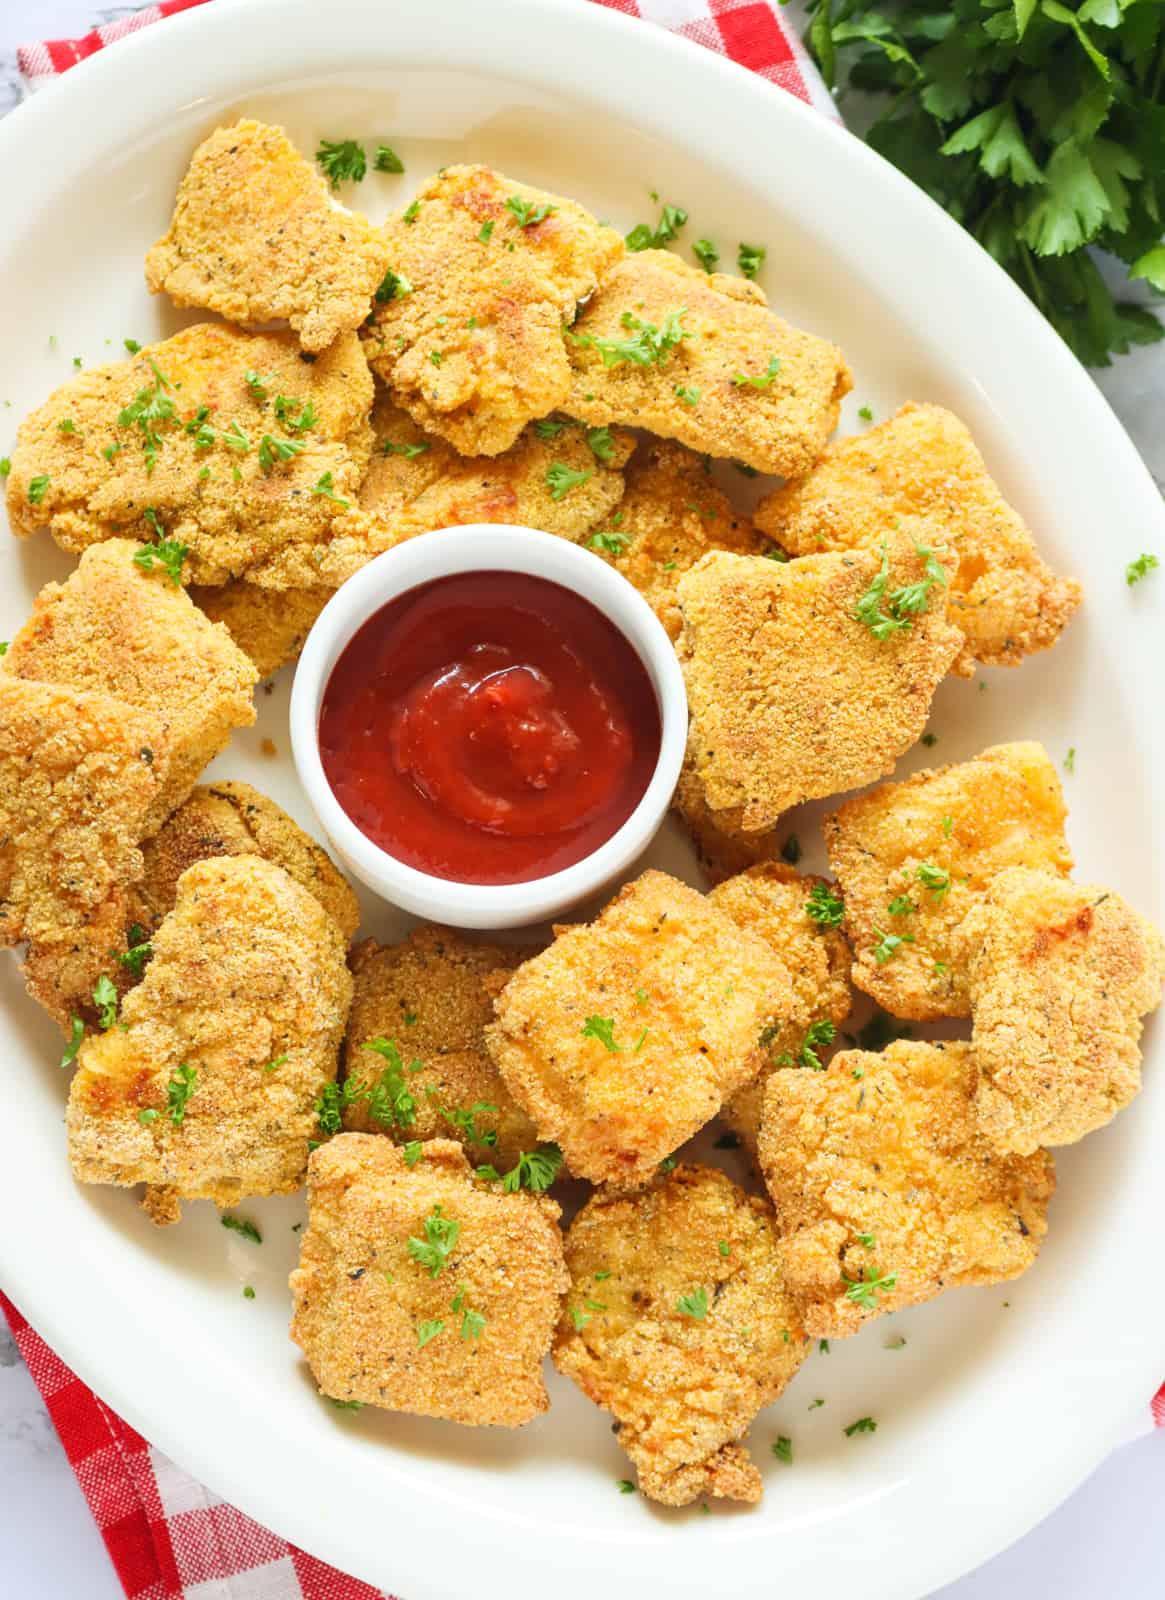 Enjoy super delicious catfish fried nuggets with ketchup on a platter